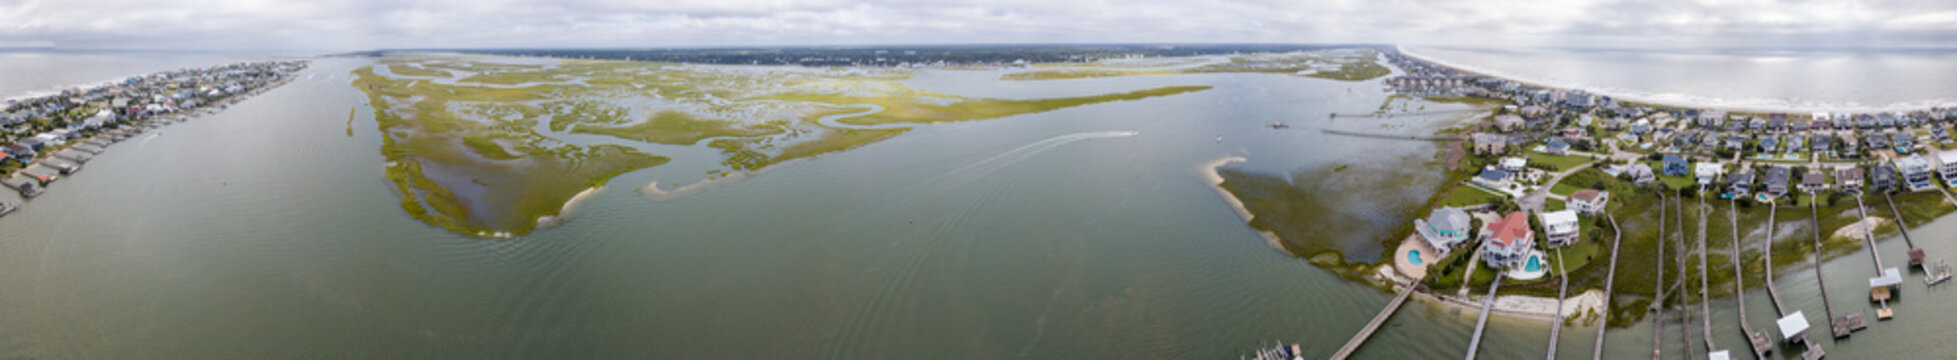 Aerial 360 degree panorama of Murrell Inlet and Surfside Beach in South Carolina along the Atlantic coast